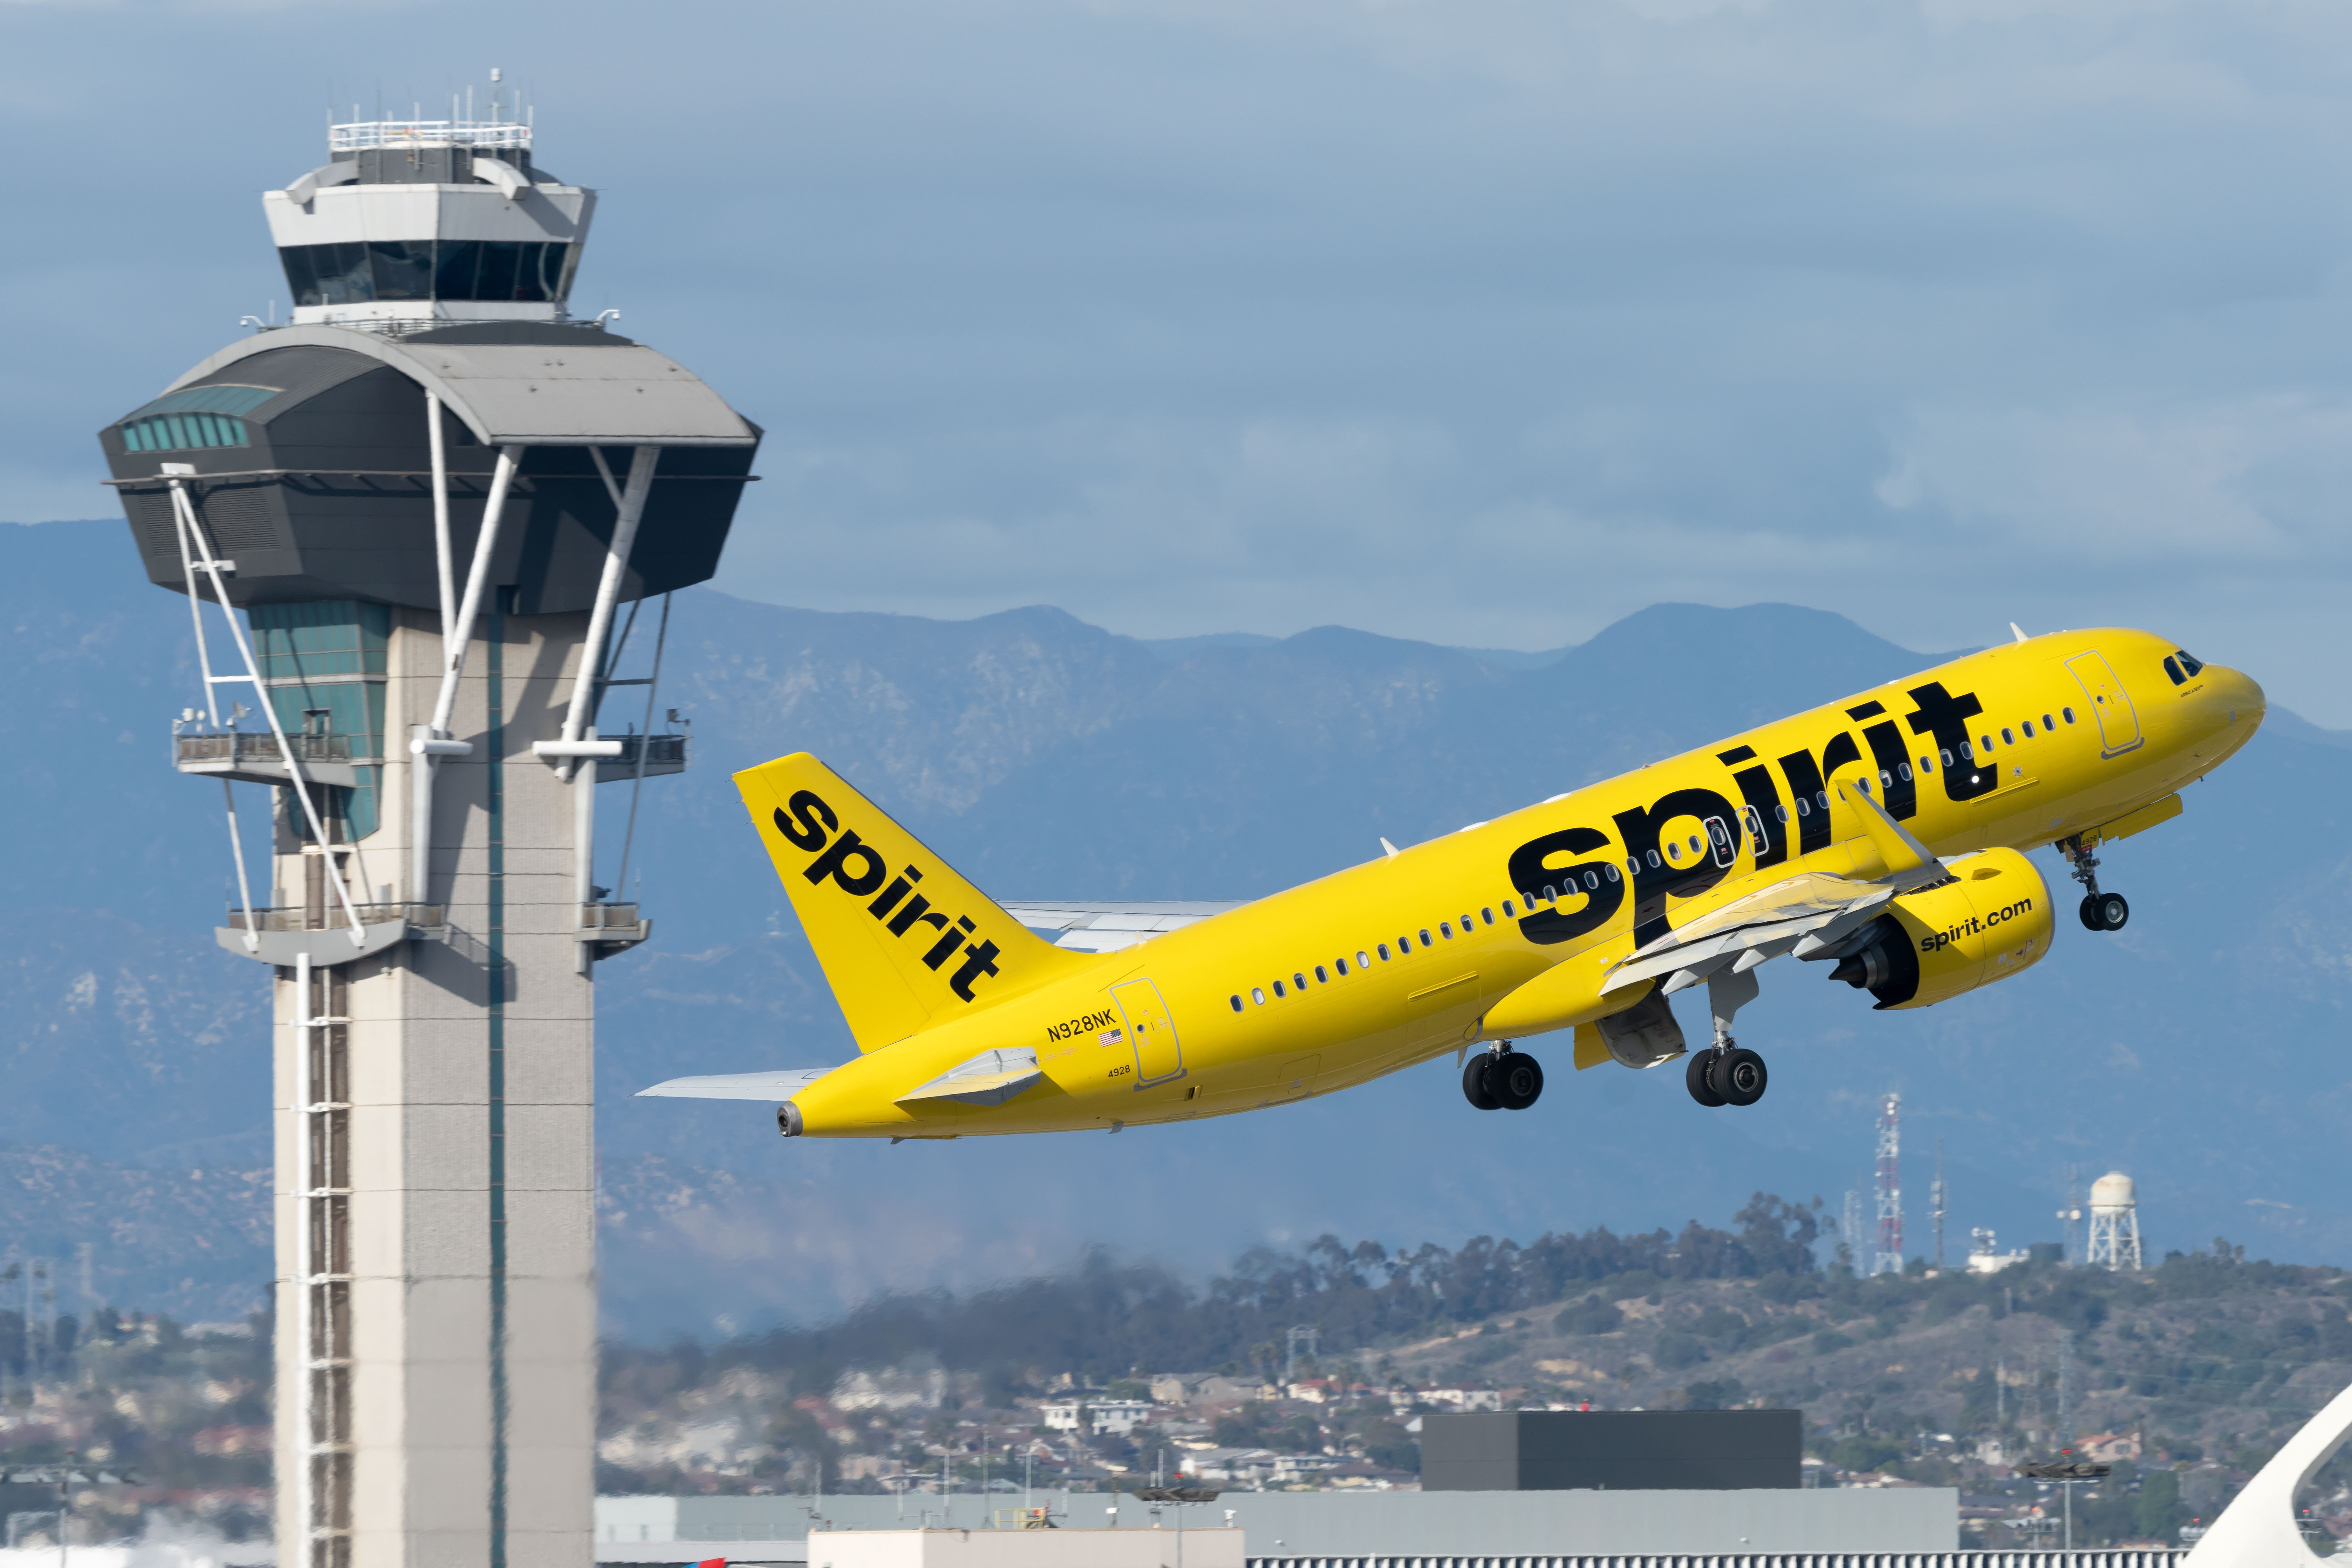 Spirit Airlines Airbus A320neo taking off from Los Angeles International Airport